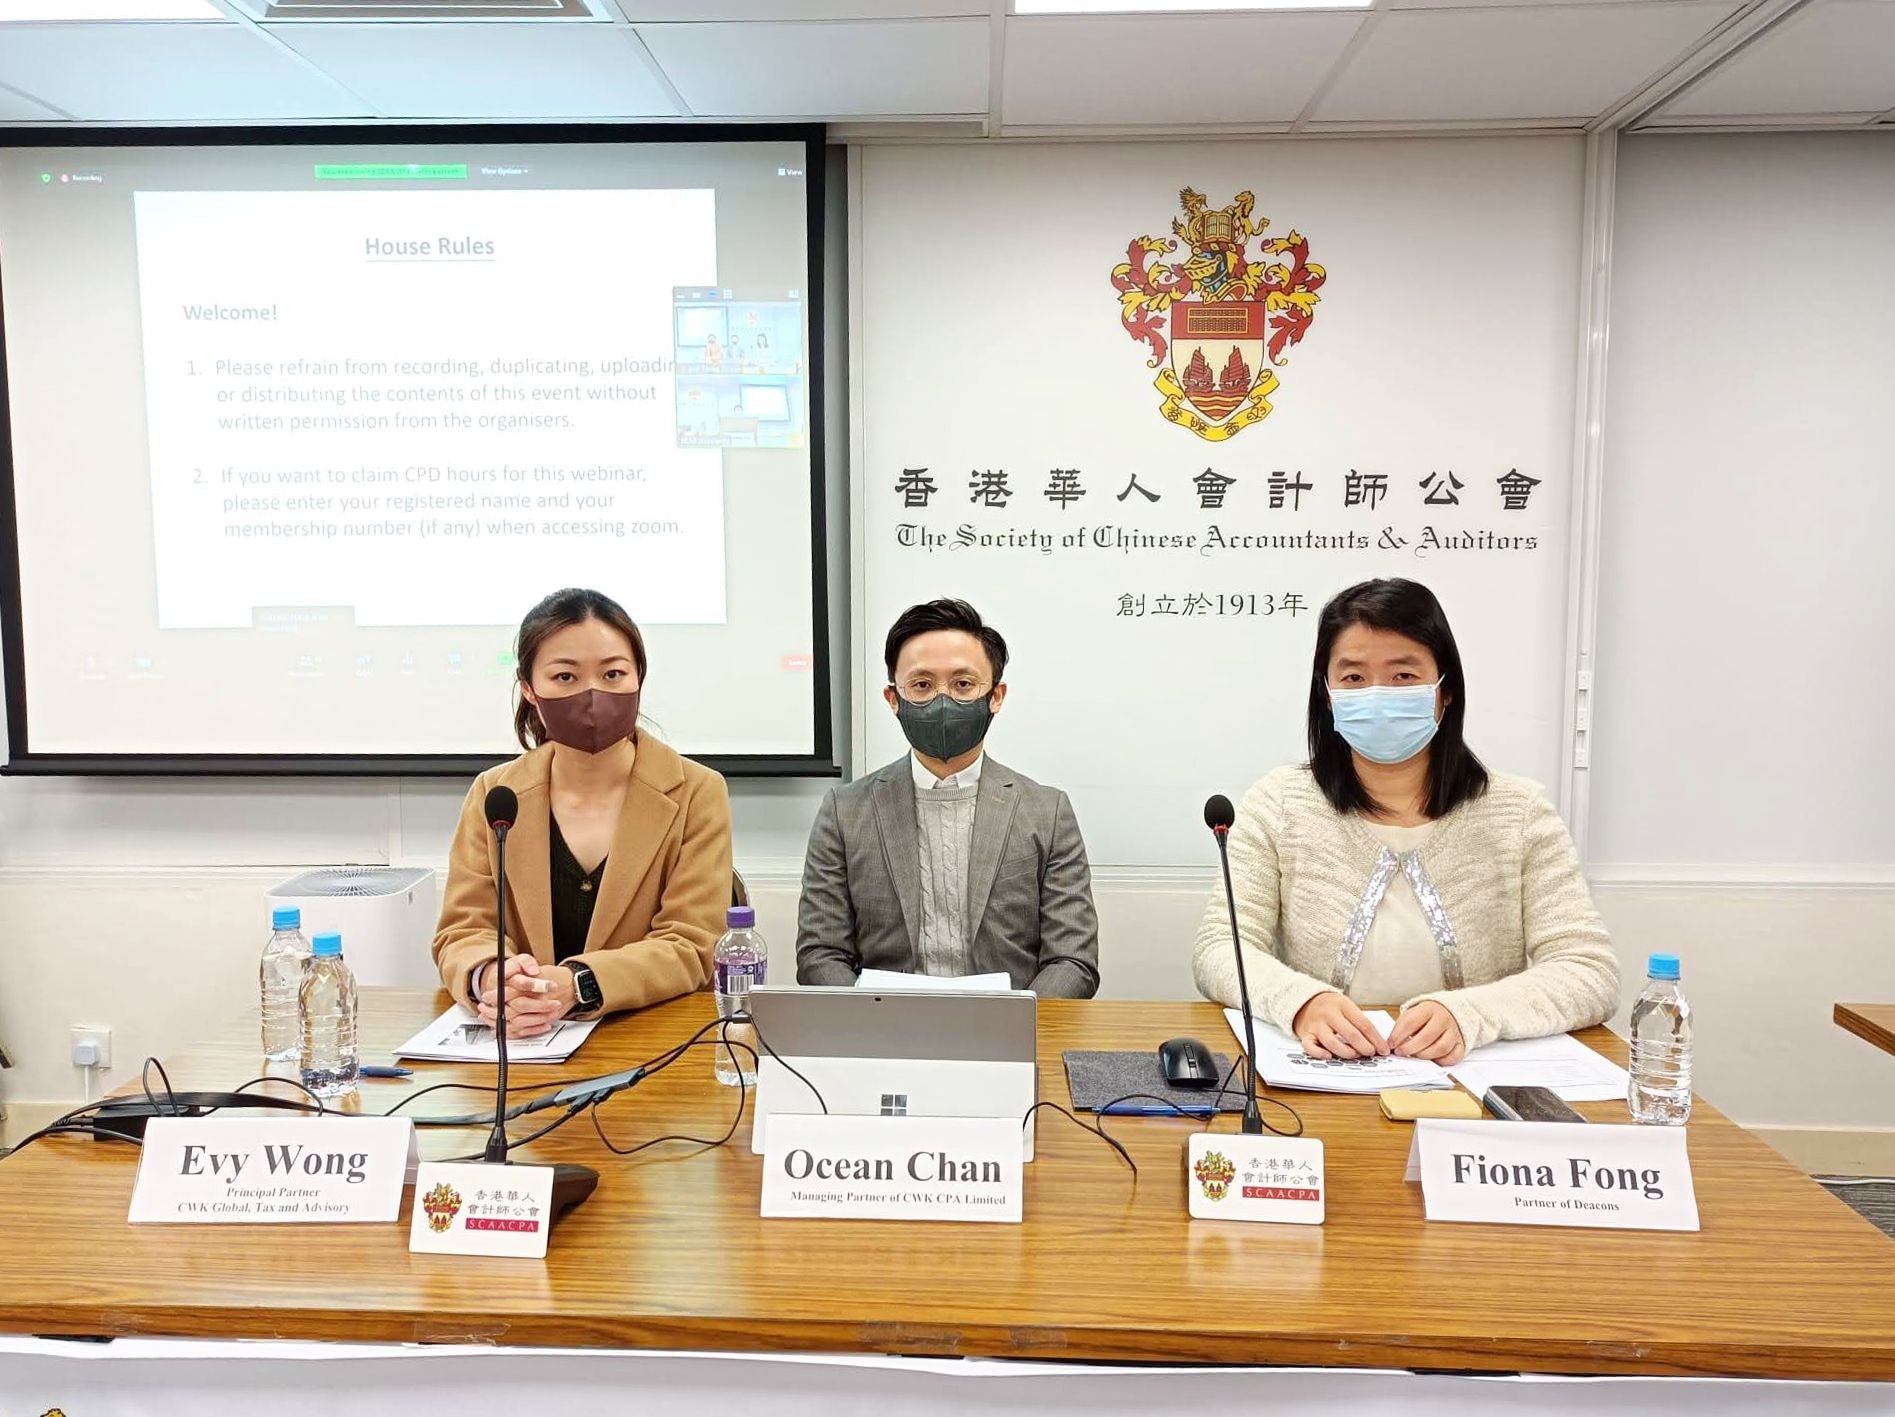 Partners of CWK Global and partner of Deacons shared their views on Hong Kong funds from legal, tax and audit perspectives at the Society of Chinese Accountants & Auditors Seminar